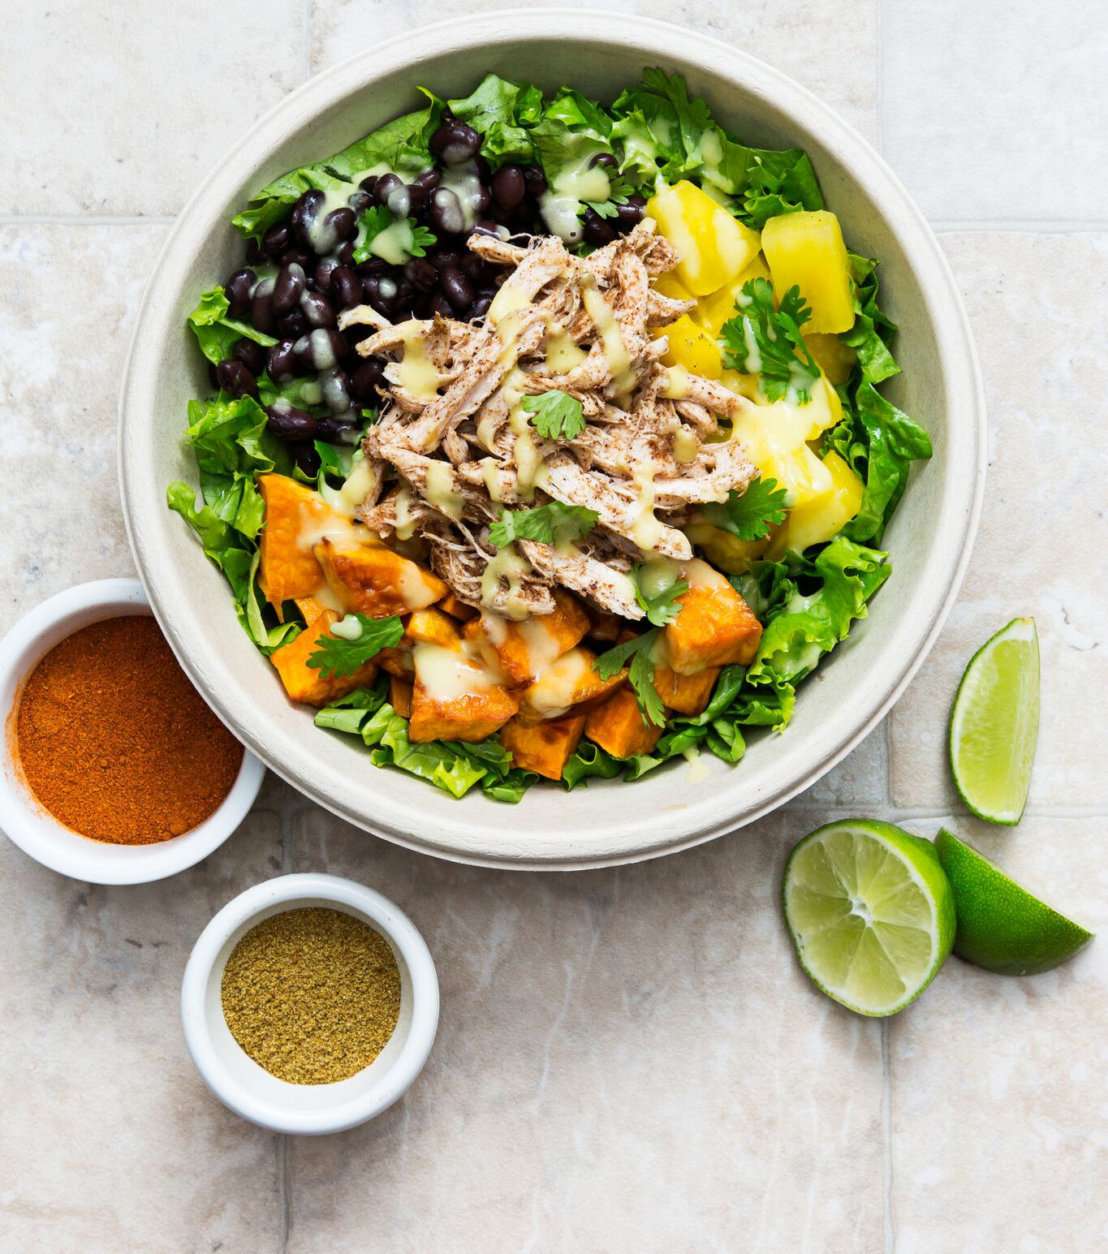 Cuisine Solutions' Caribbean bowl. The fast-casual option offers different flavors of cuisine, including Mexican, Indian, Asian, Mediterranean and Caribbean which the company said helps cut back on "menu fatigue." (Courtesy Cuisine Solutions)